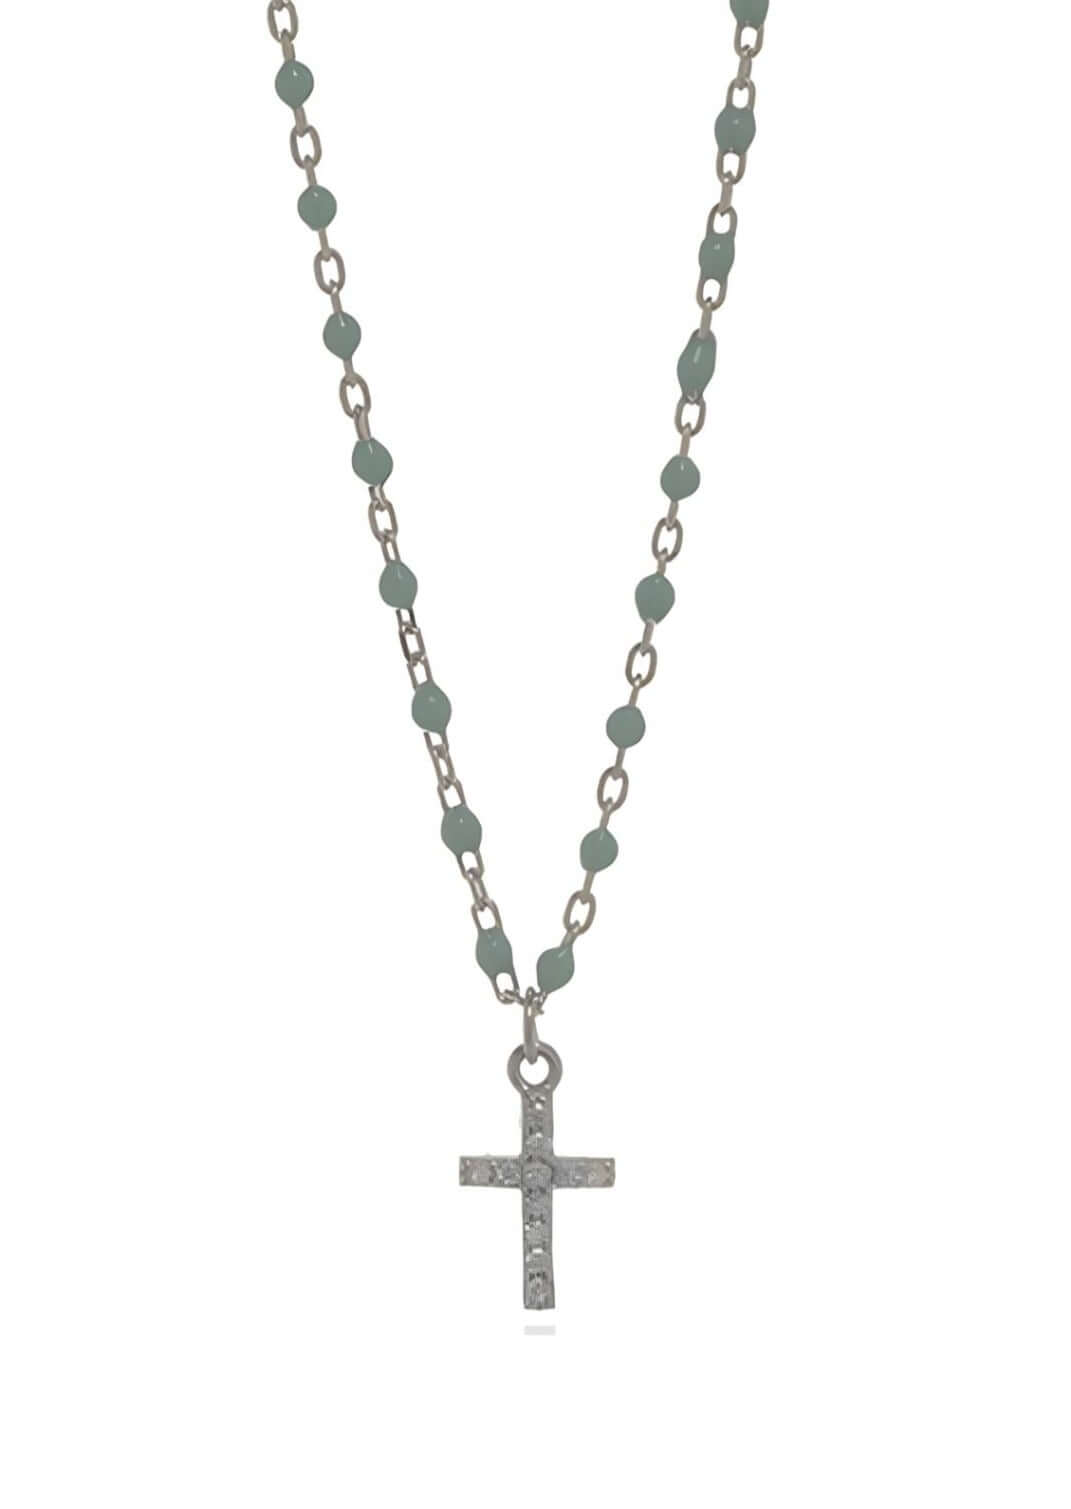 Made in USA, Cross My Heart Women's Sterling Silver Beaded Cross Necklace by Artist Anuja Tolia is made of 925 Sterling Silver with Adjustable Length